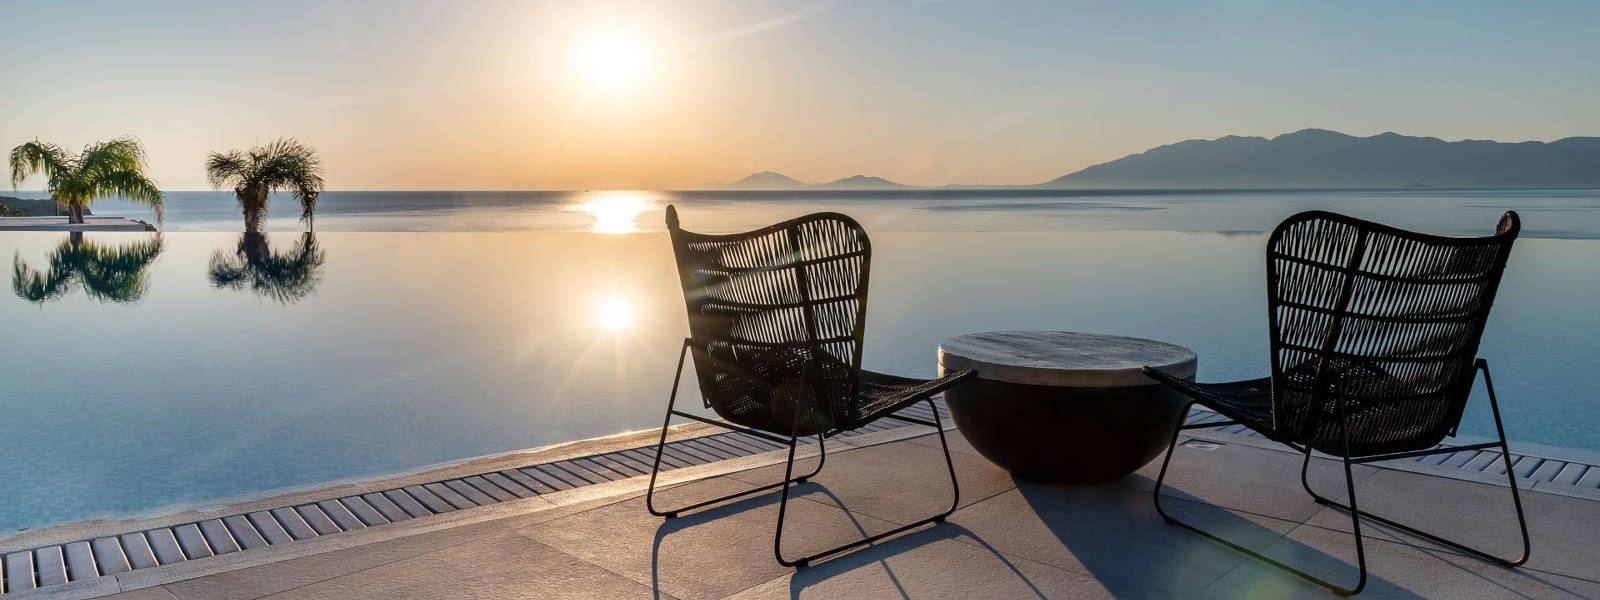 
Table with chairs in front of the pool at sunrise